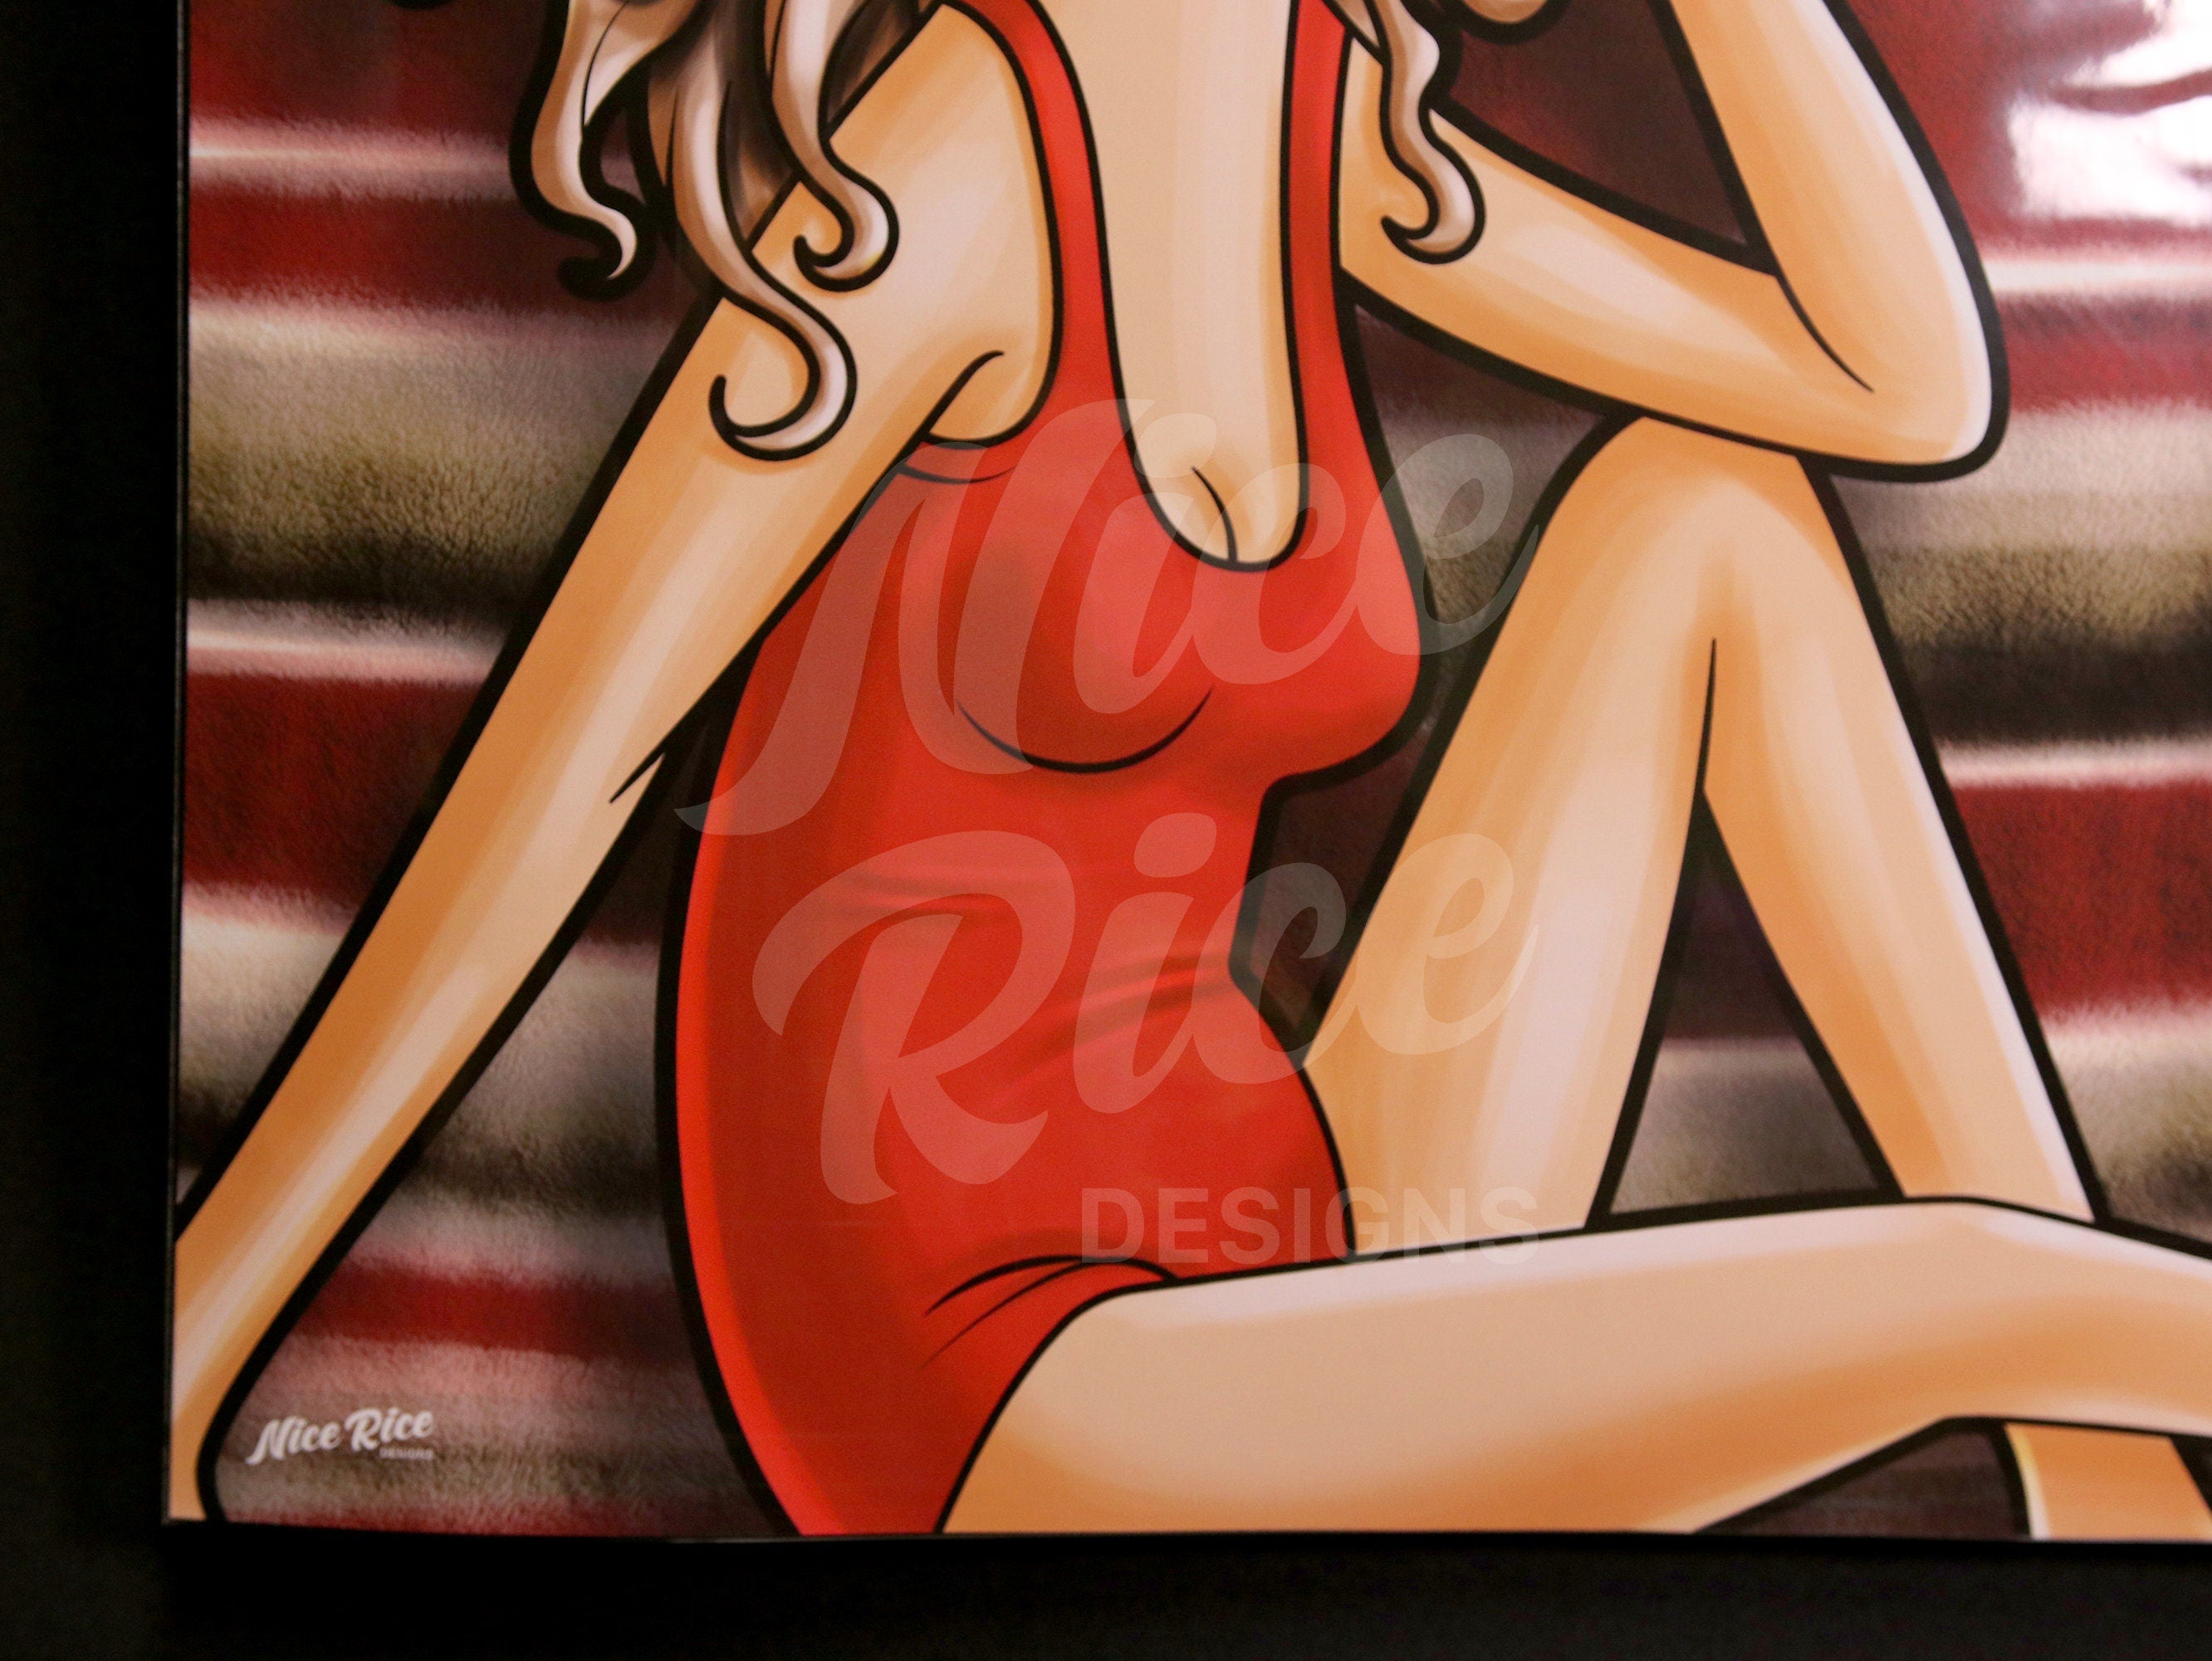 The Red Swimsuit Poster by Nice Rice Designs